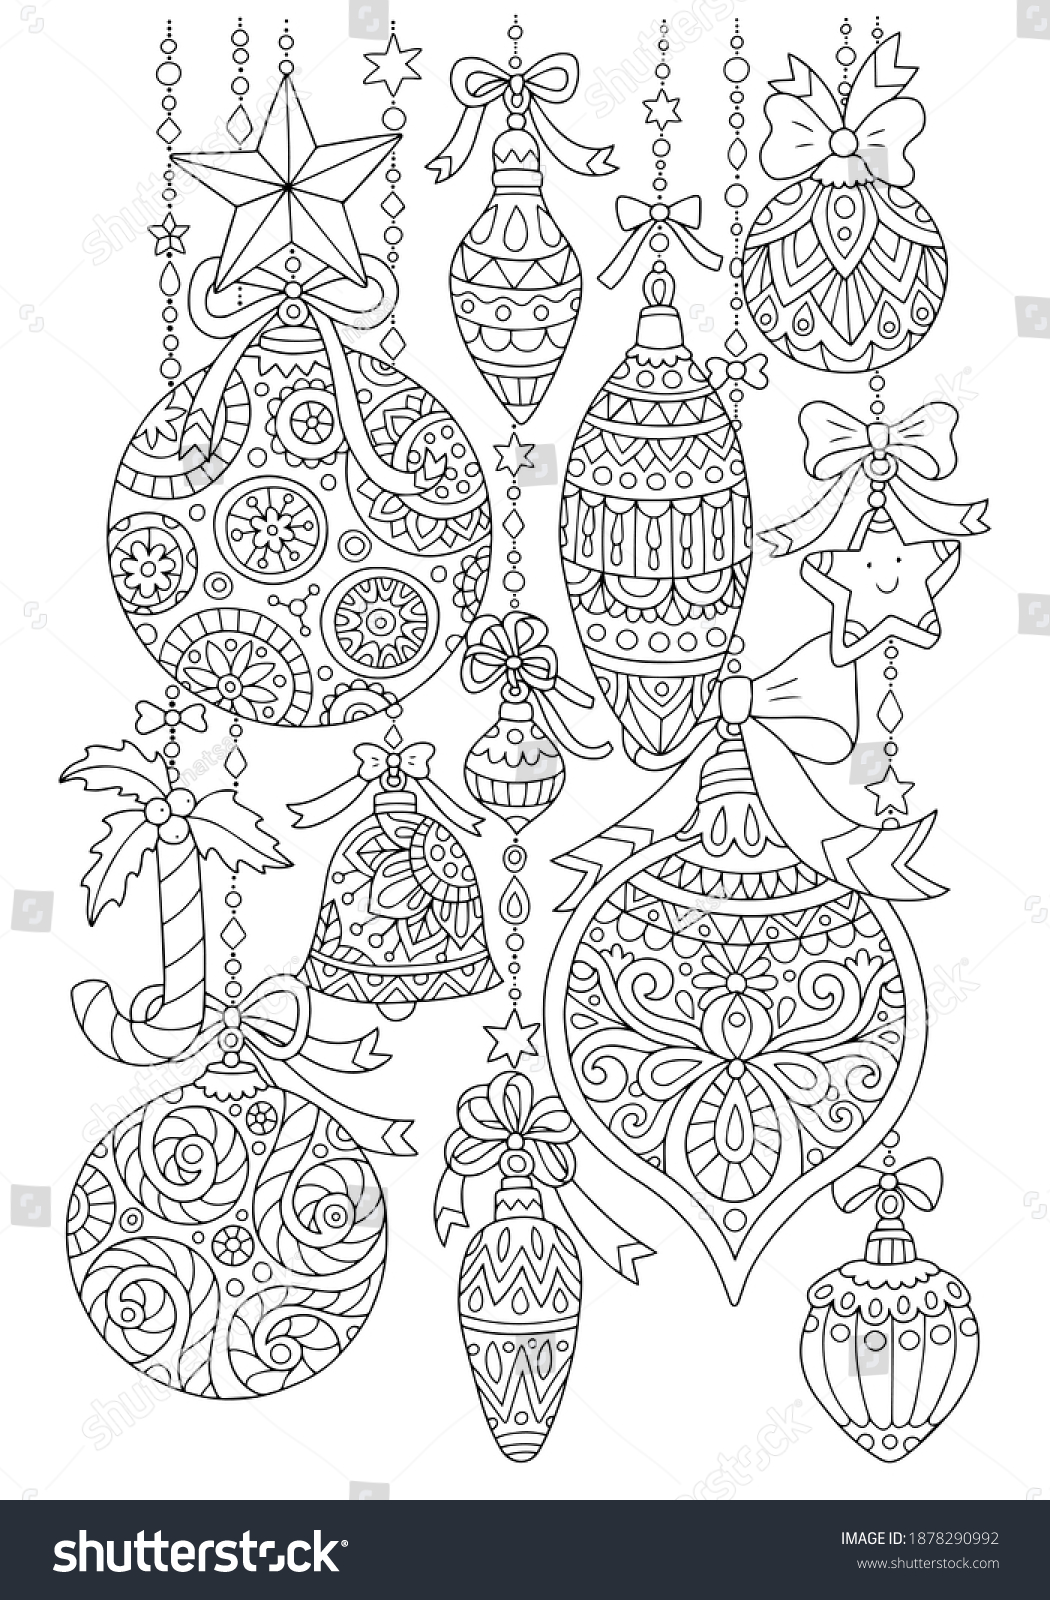 Coloring Page Christmas Ornaments Stock Vector (Royalty Free ...